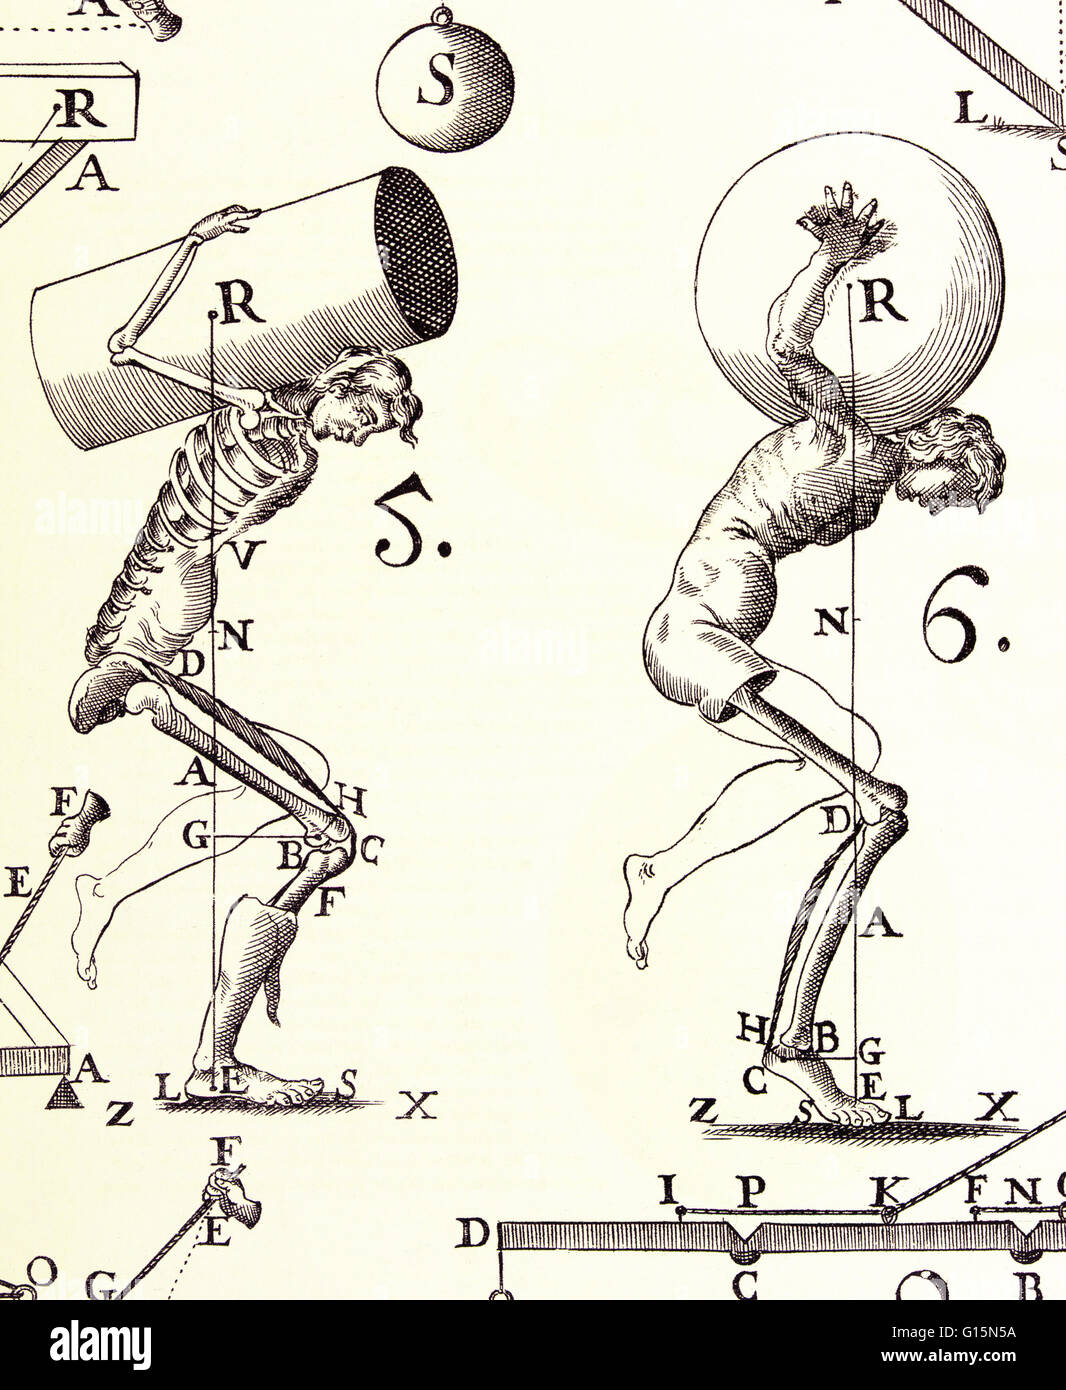 Illustration from De Motu Animalium (On Animal Motion, 1680) by Alfonso Borelli (1608-1679). Borelli studied and illustrated the biomechanics of the living body as a system of levers, pistons and pivots. This image shows how the human body centers and sus Stock Photo